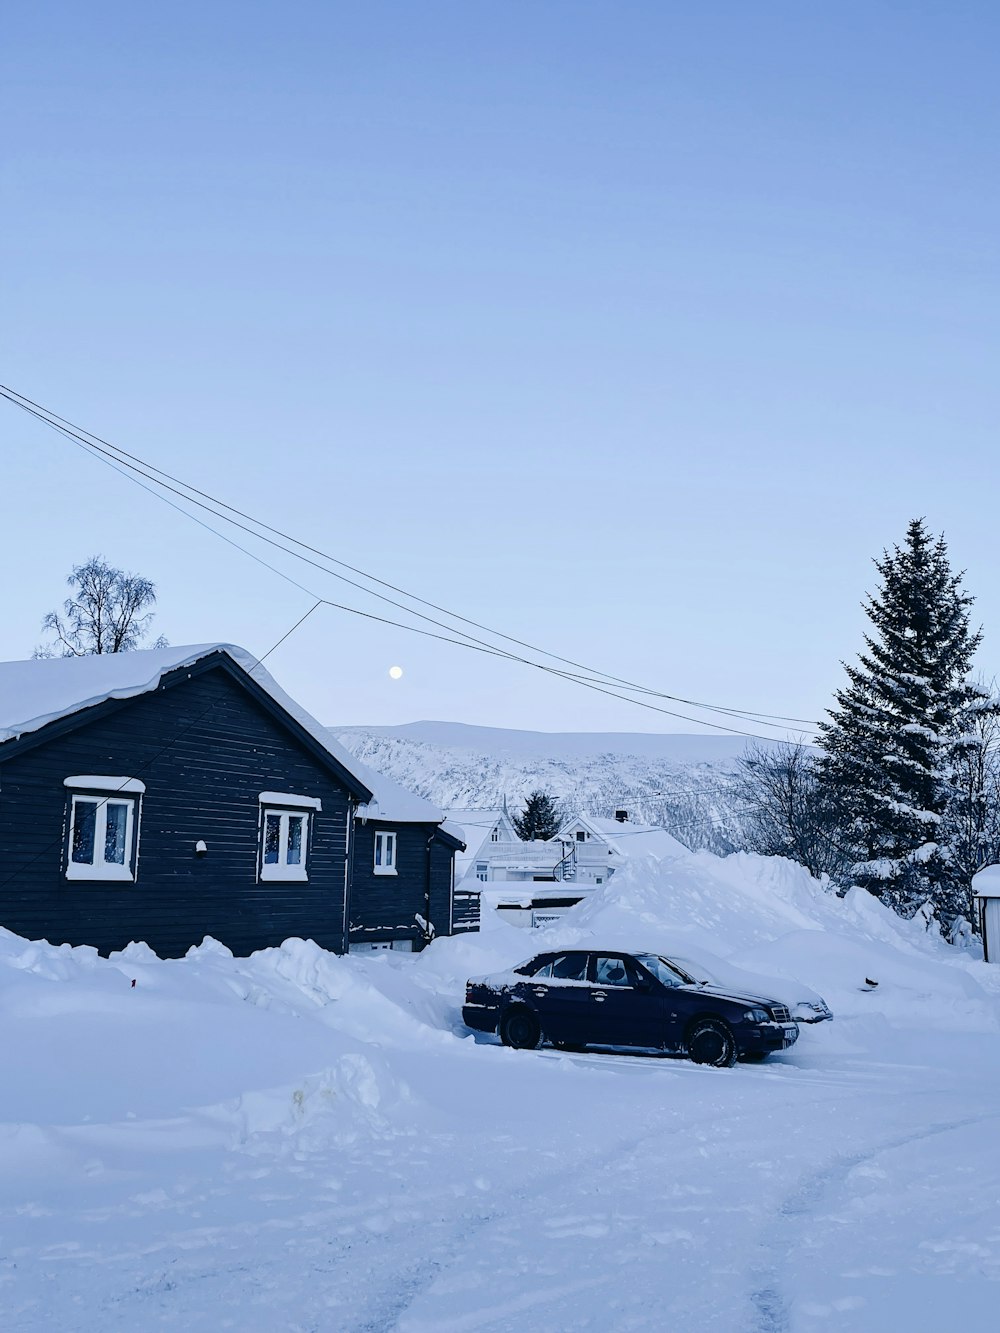 a car is parked in the snow near a house